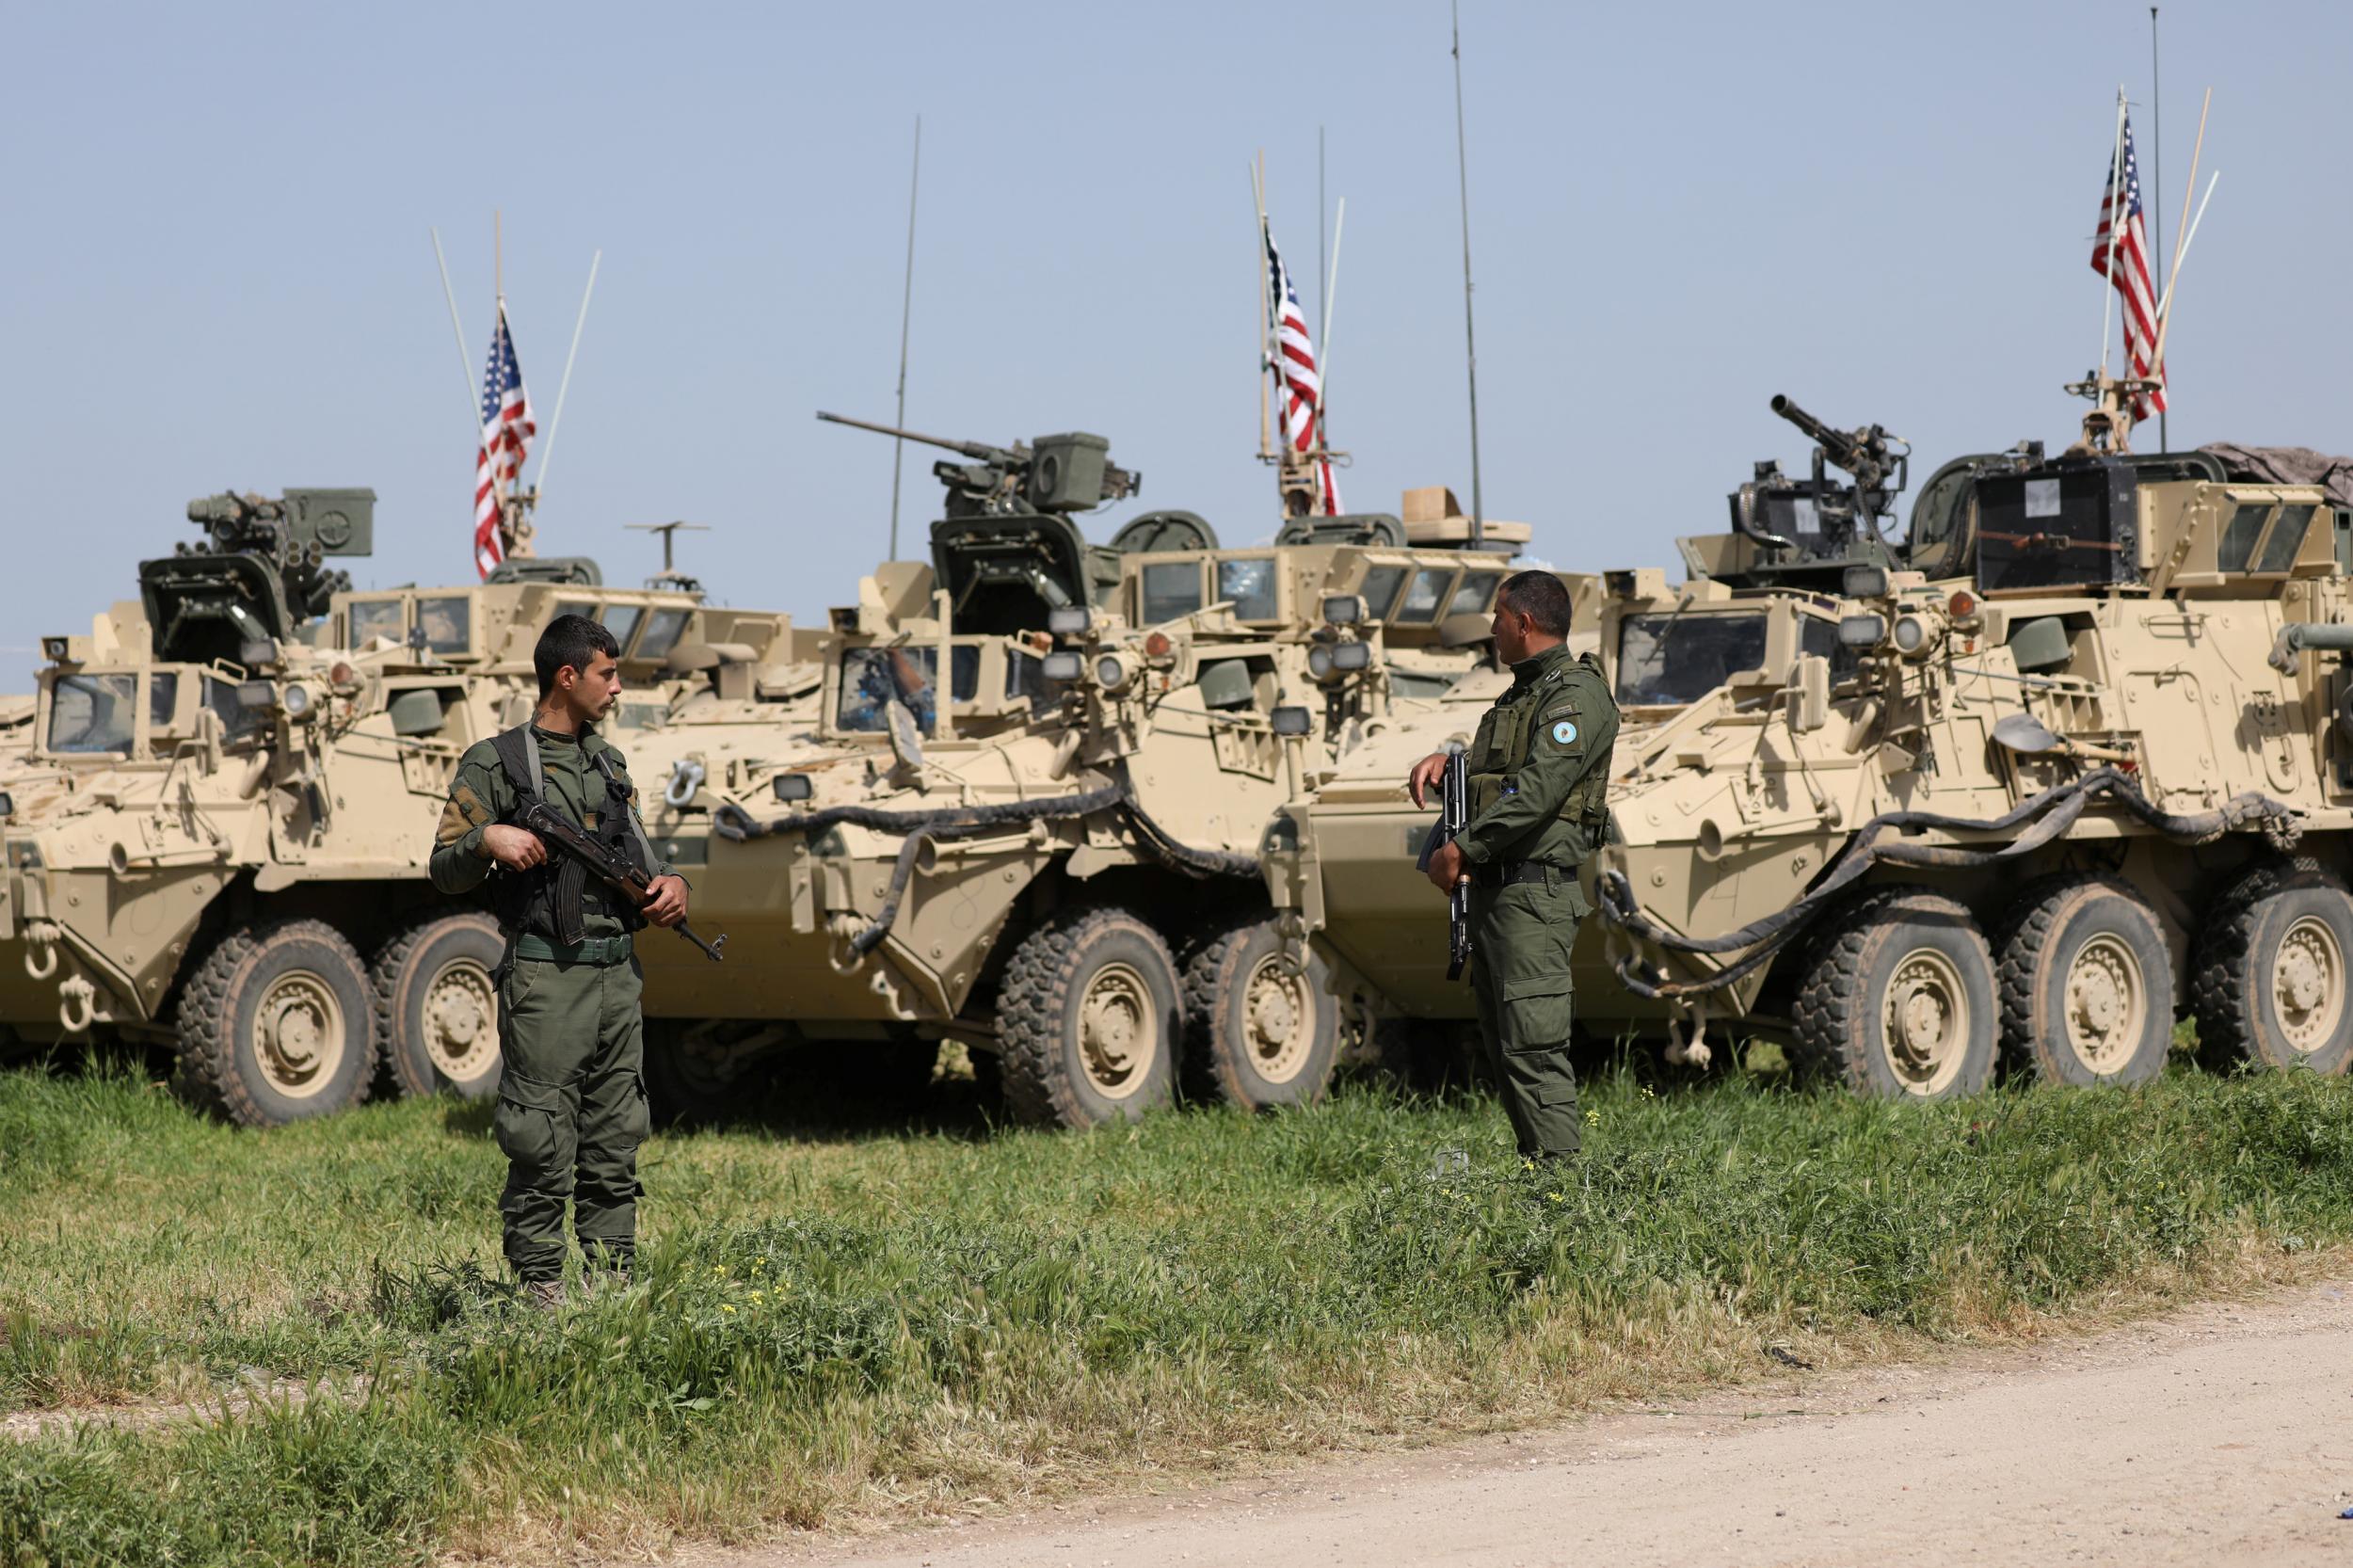 Kurdish YPG fighters stand near US military vehicles in the town of Darbasiya near the Turkish border, in Syria on 29 April 2017